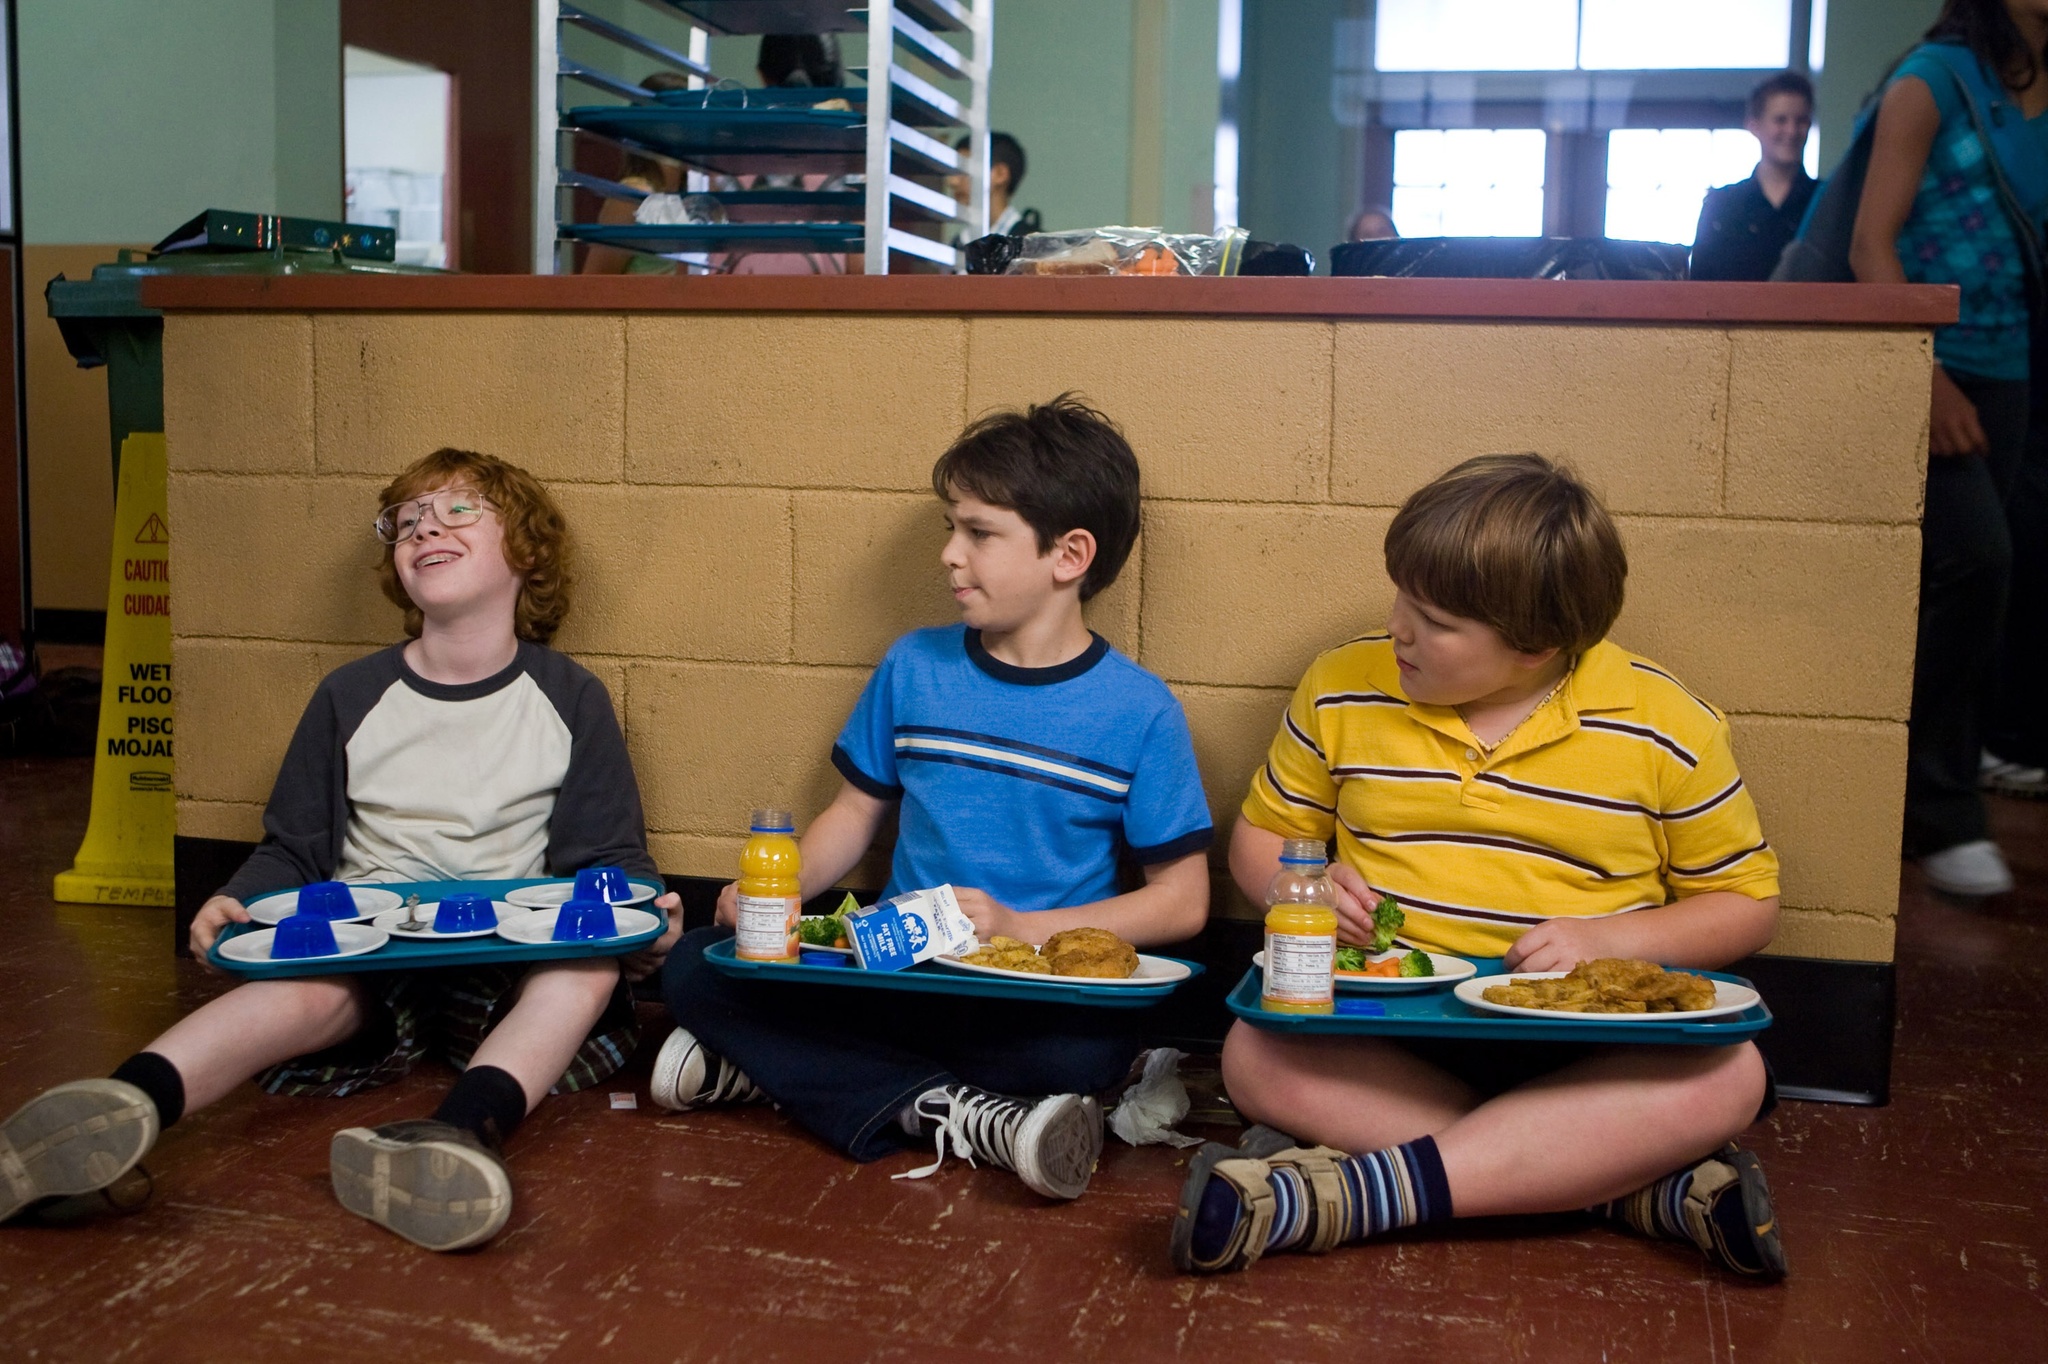 Still of Grayson Russell, Zachary Gordon and Robert Capron in Diary of a Wimpy Kid (2010)